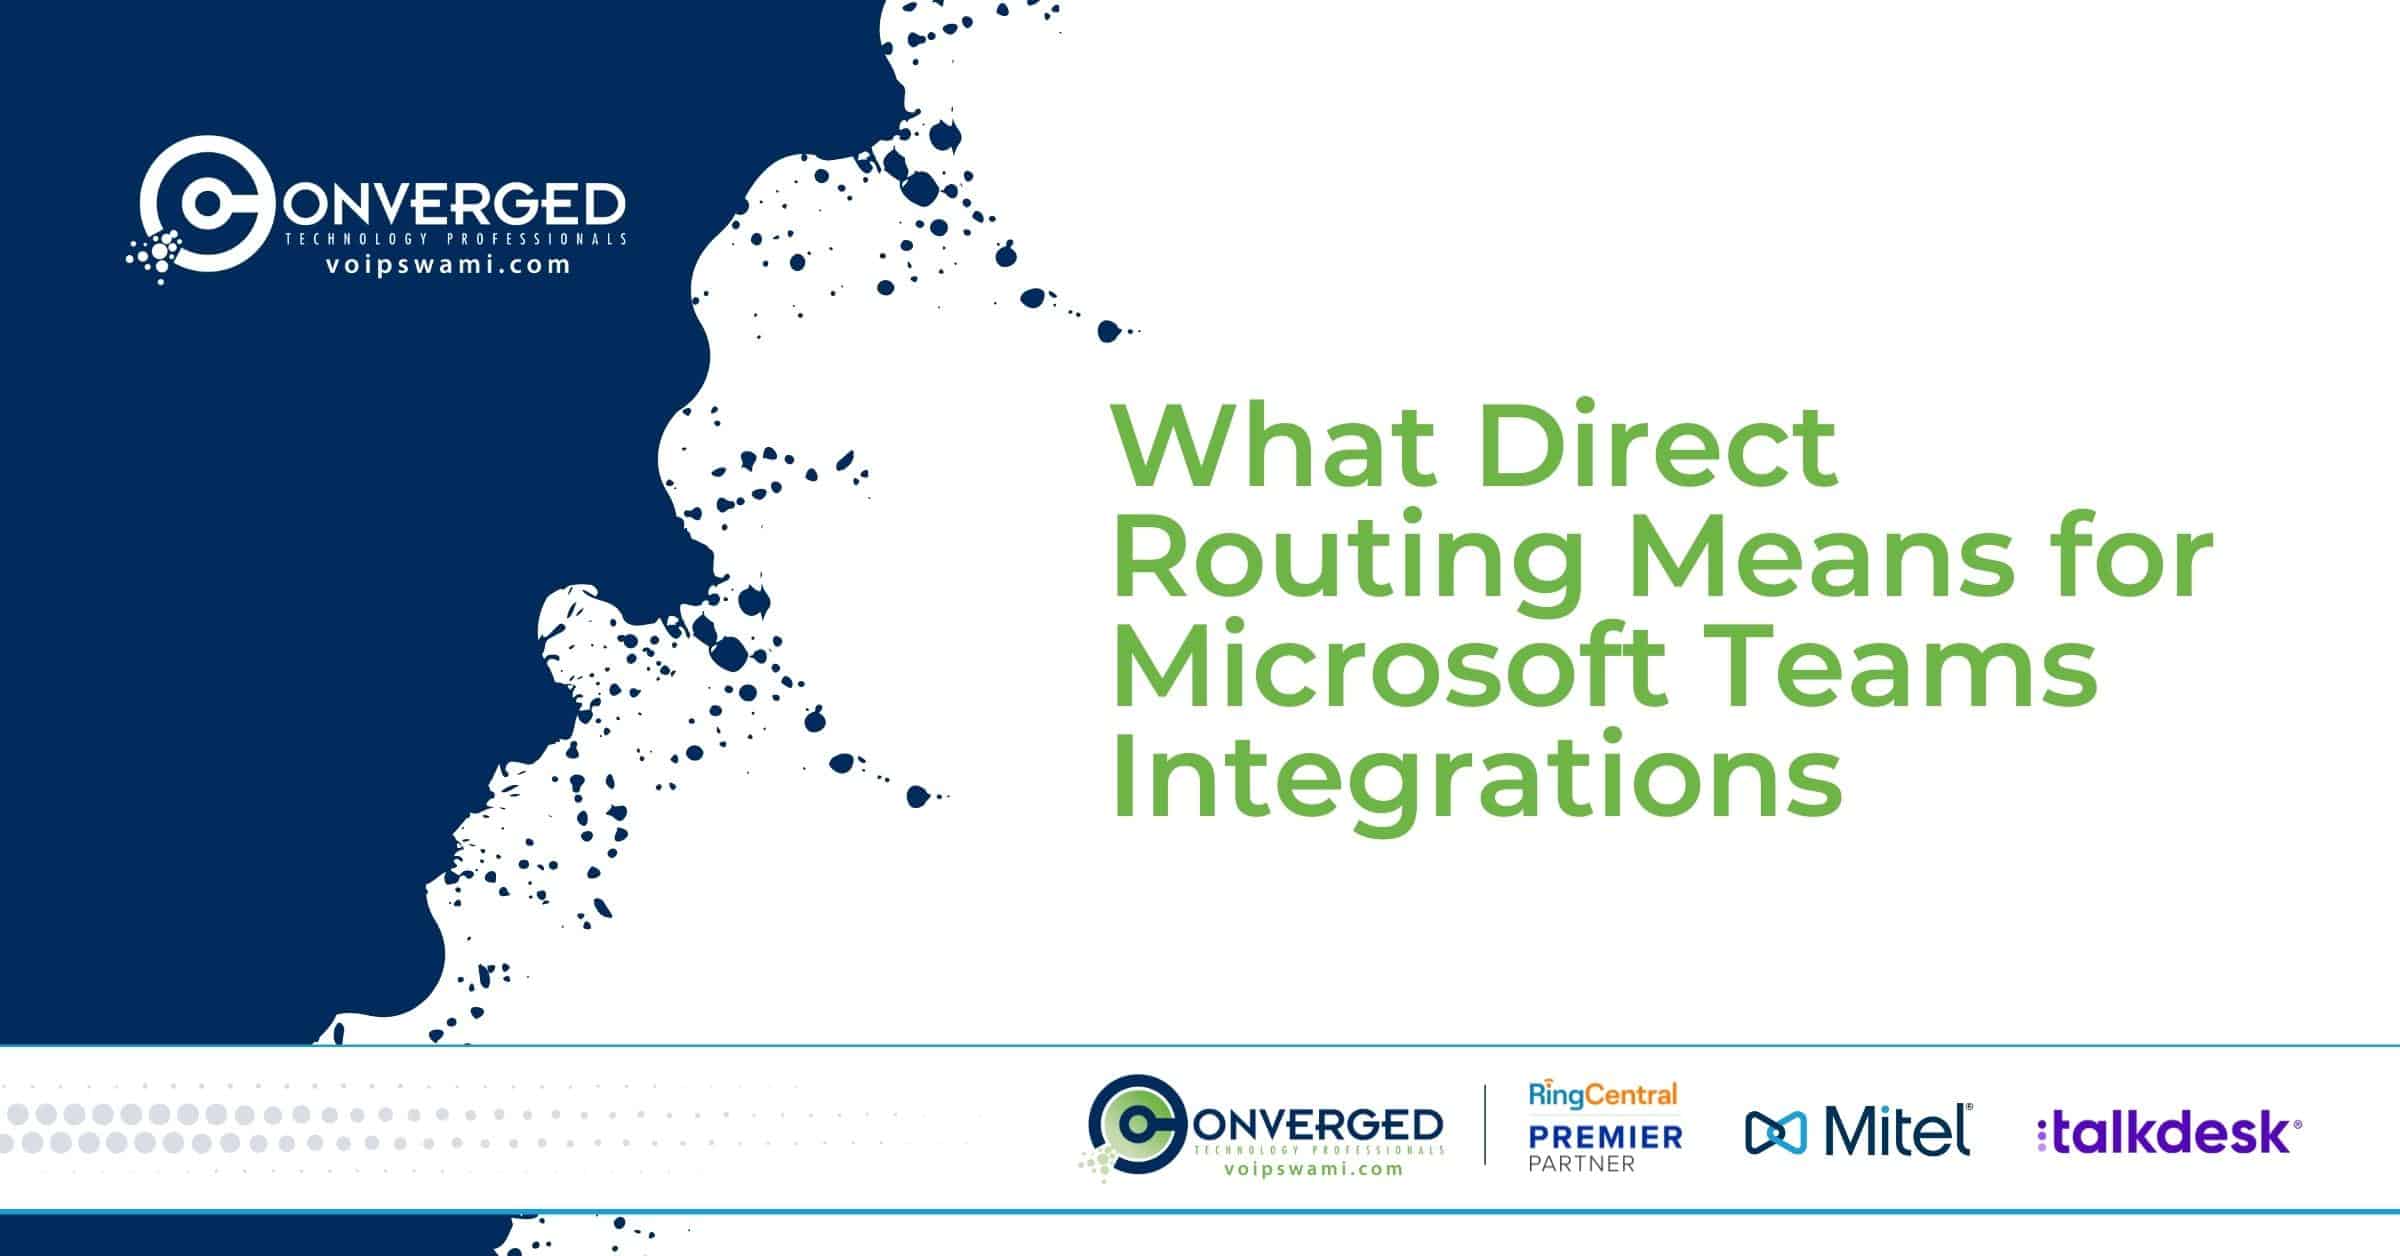 What Direct Routing Means for Microsoft Teams Integrations